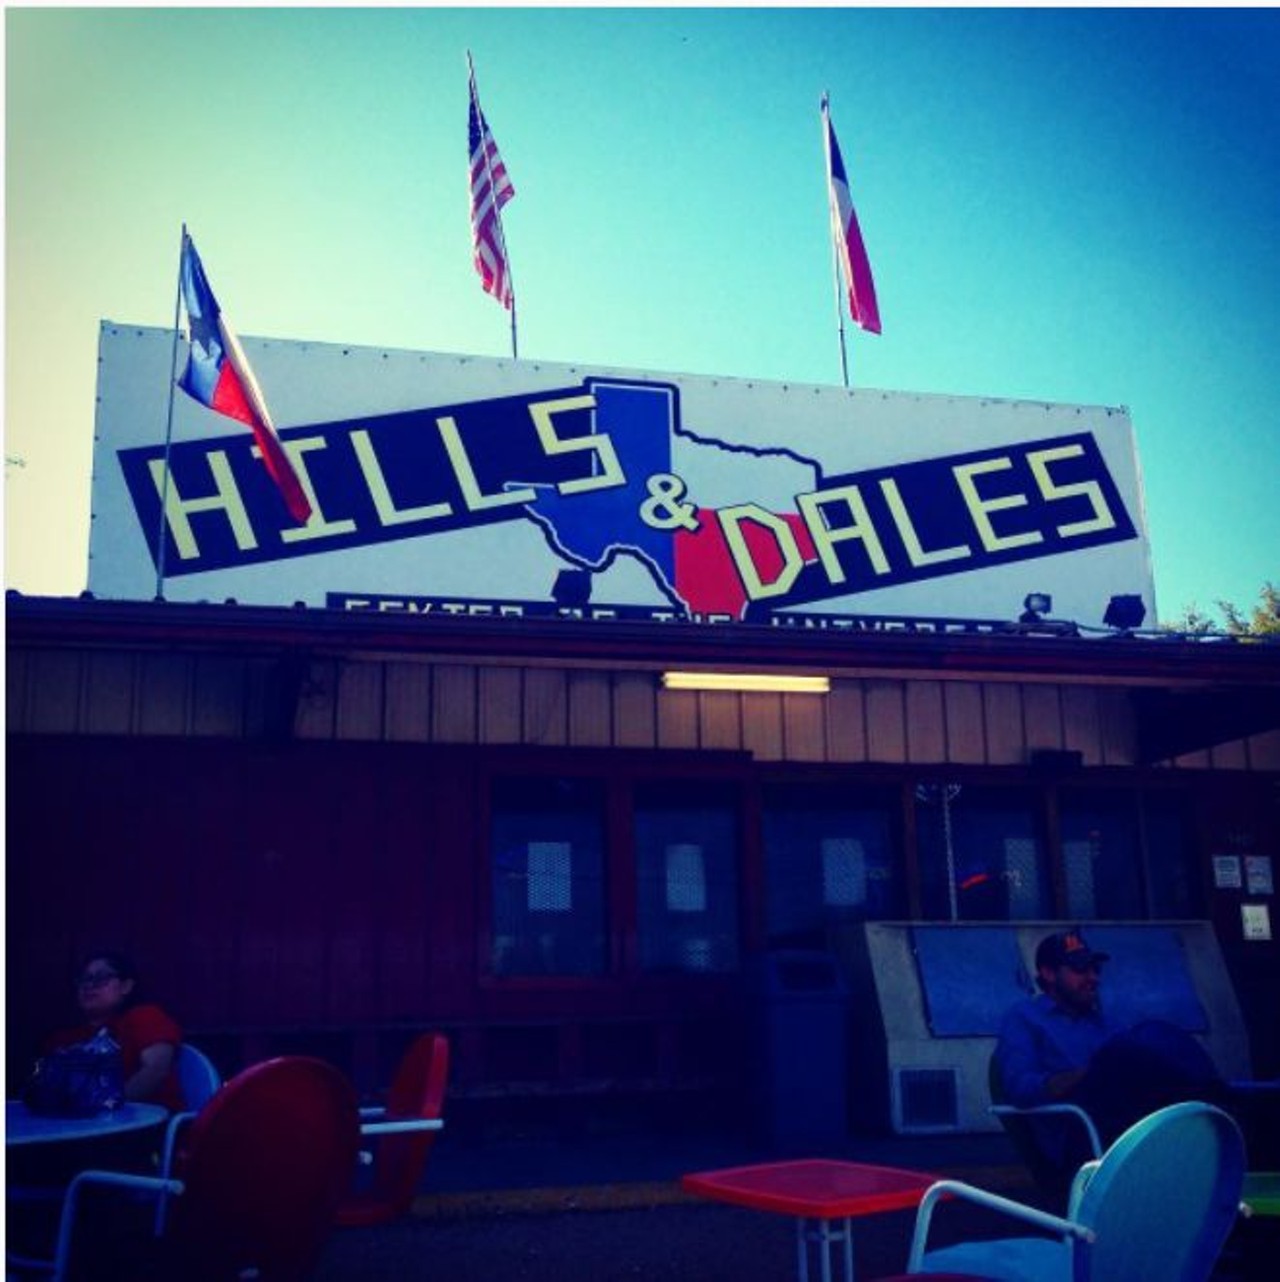 Hills and Dales Ice House
15403 White Fawn Drive
If you find yourself on the city's northwest side, stop in to "the center of the universe" for a cold brew and some pup time.
Photo via Instagram,  tristanjolly